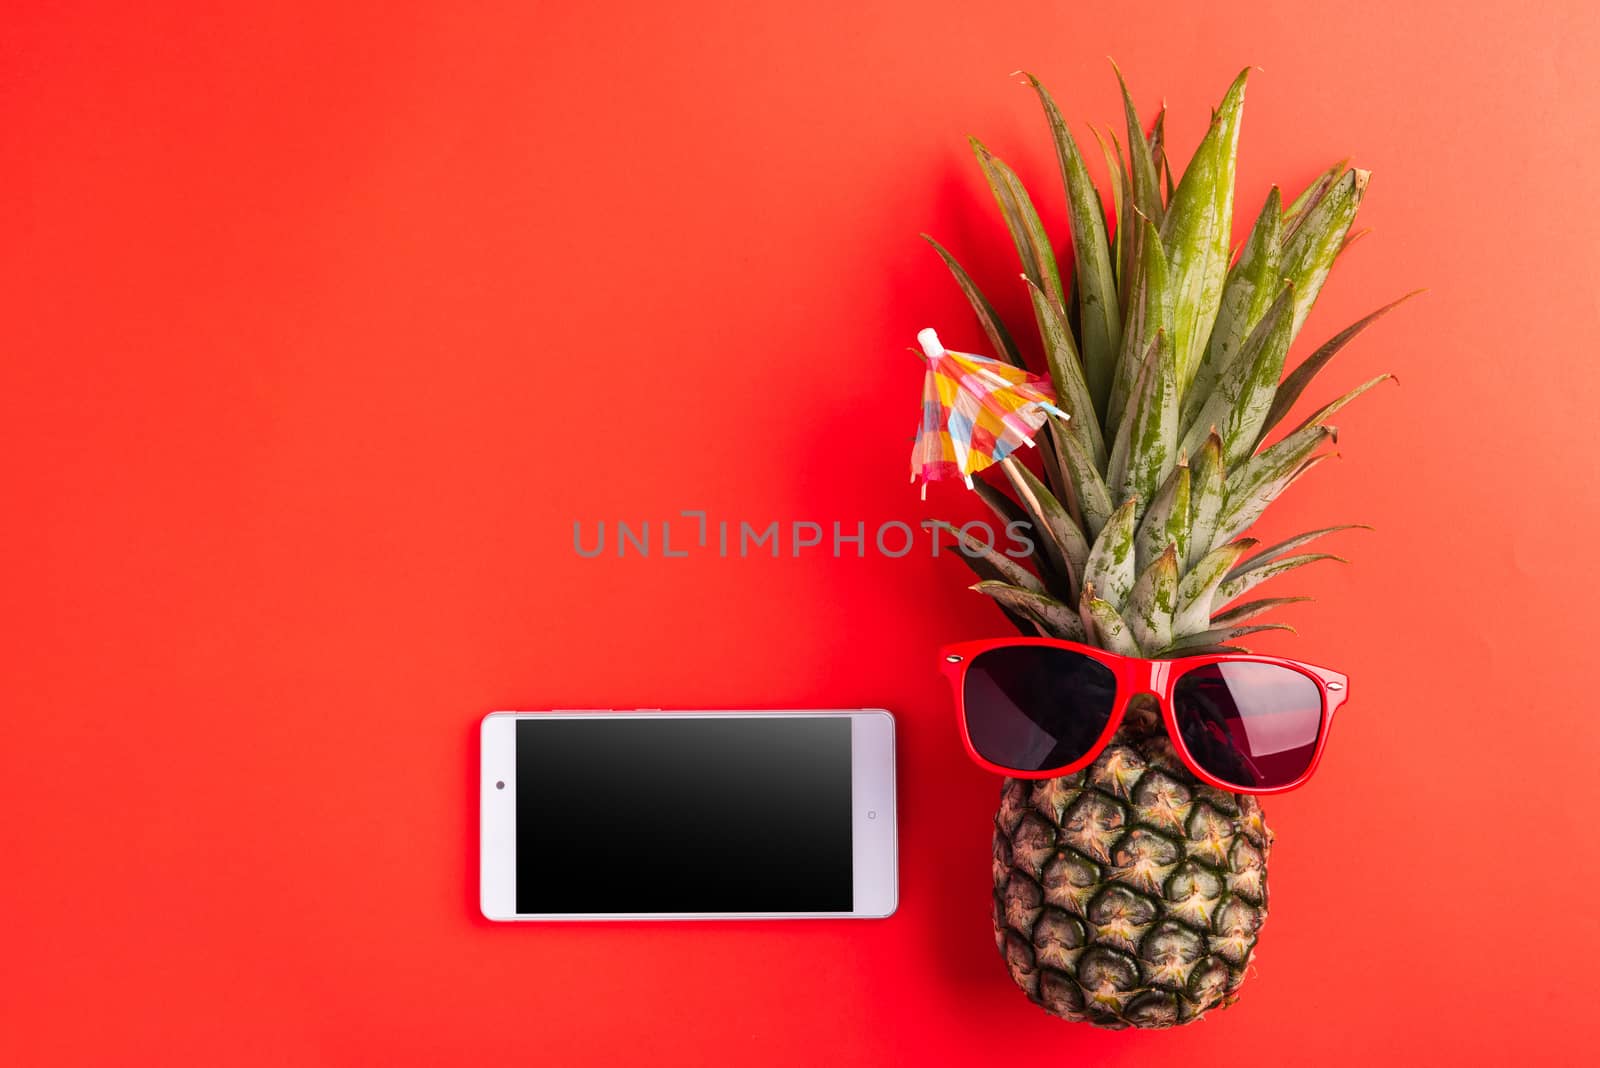 Celebrate Summer Pineapple Day Concept, Top view of funny pineapple wear red sunglasses and smartphone blank screen, isolated on red background, Holiday summertime in tropical, minimal stylish fruit